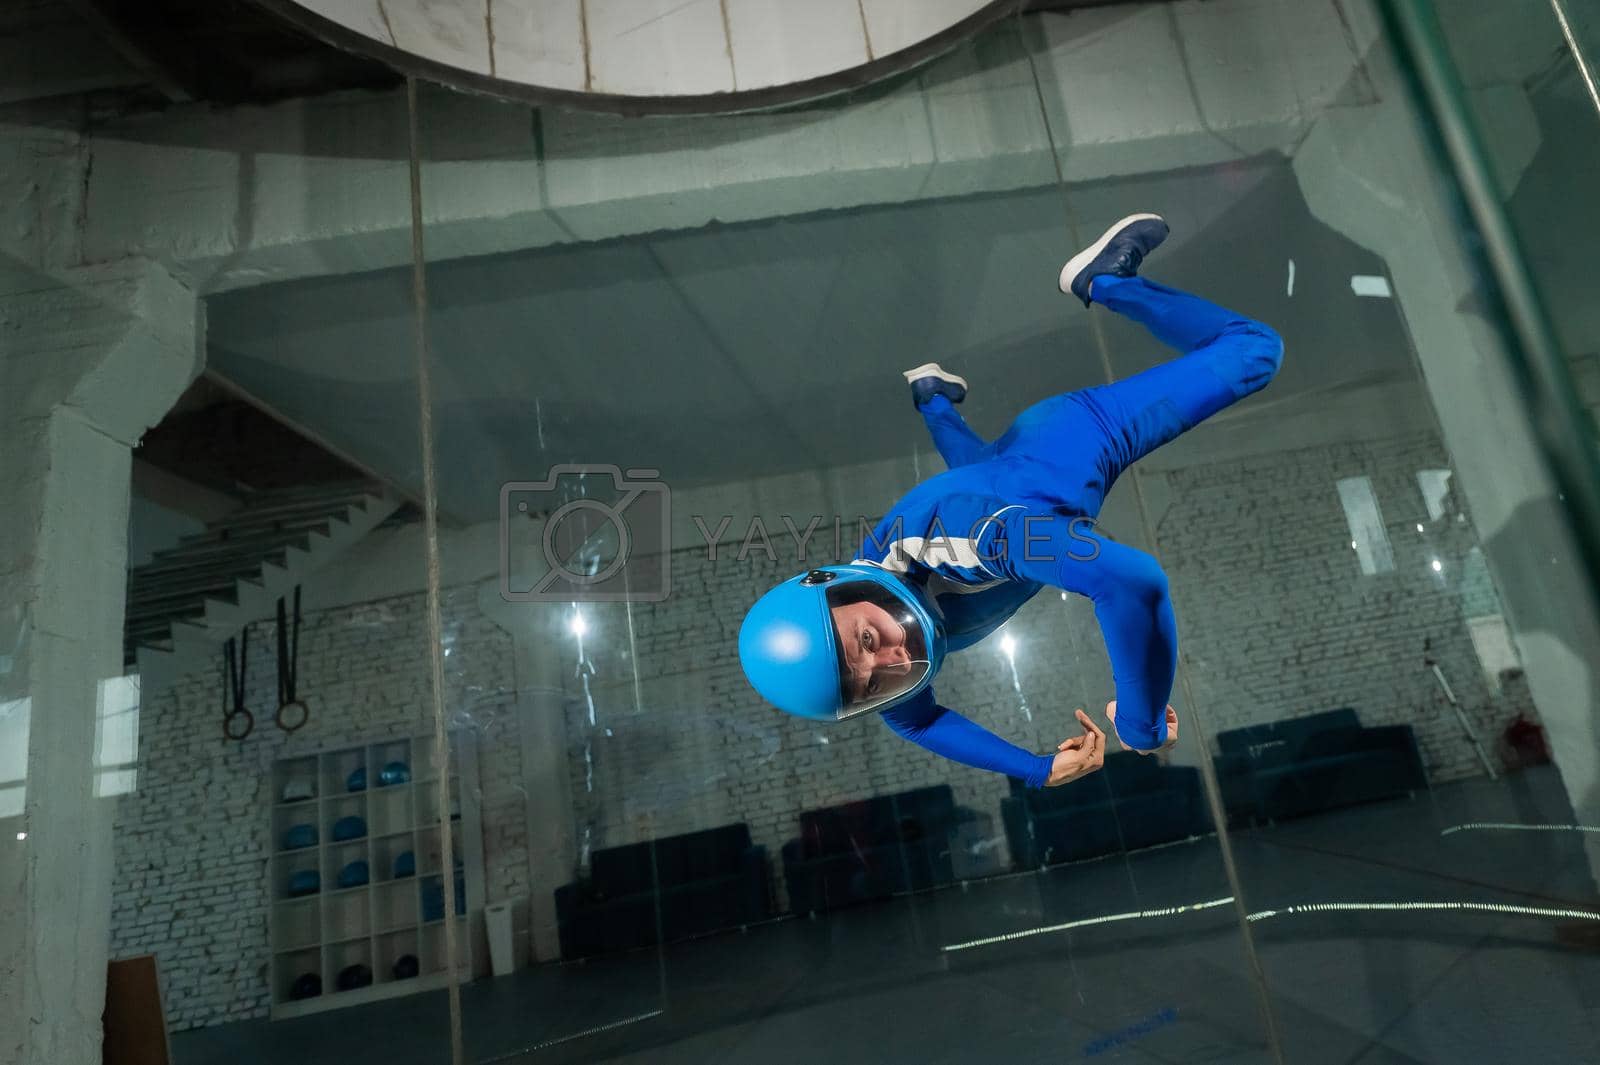 Royalty free image of A man in overalls and a protective helmet enjoys flying in a wind tunnel. Free fall simulator by mrwed54